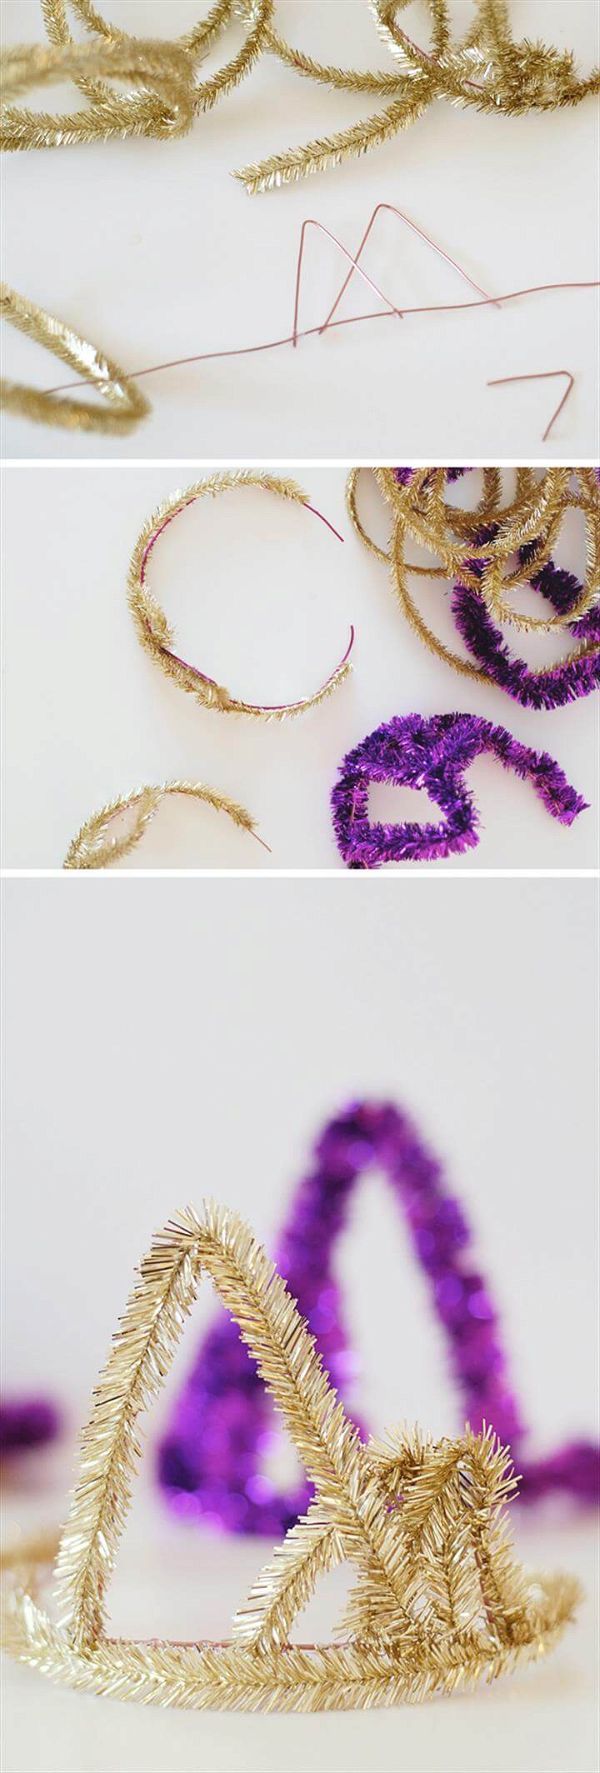 New Years Eve Party Hacks - DIY Tinsel NYE Party Crowns